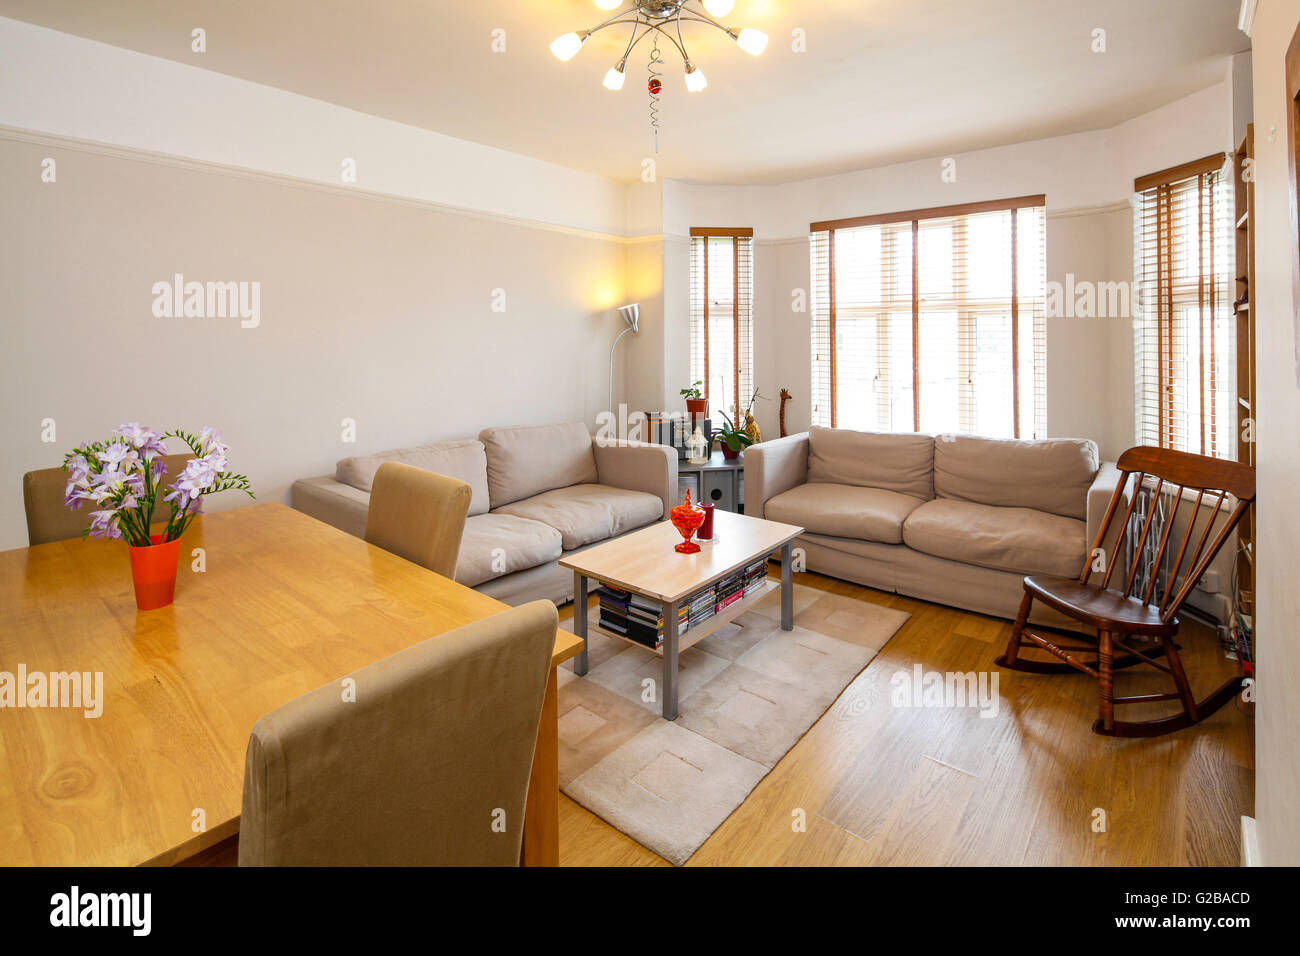 Creighton House, North London. Living room with traditional furniture and dining table. Stock Photo